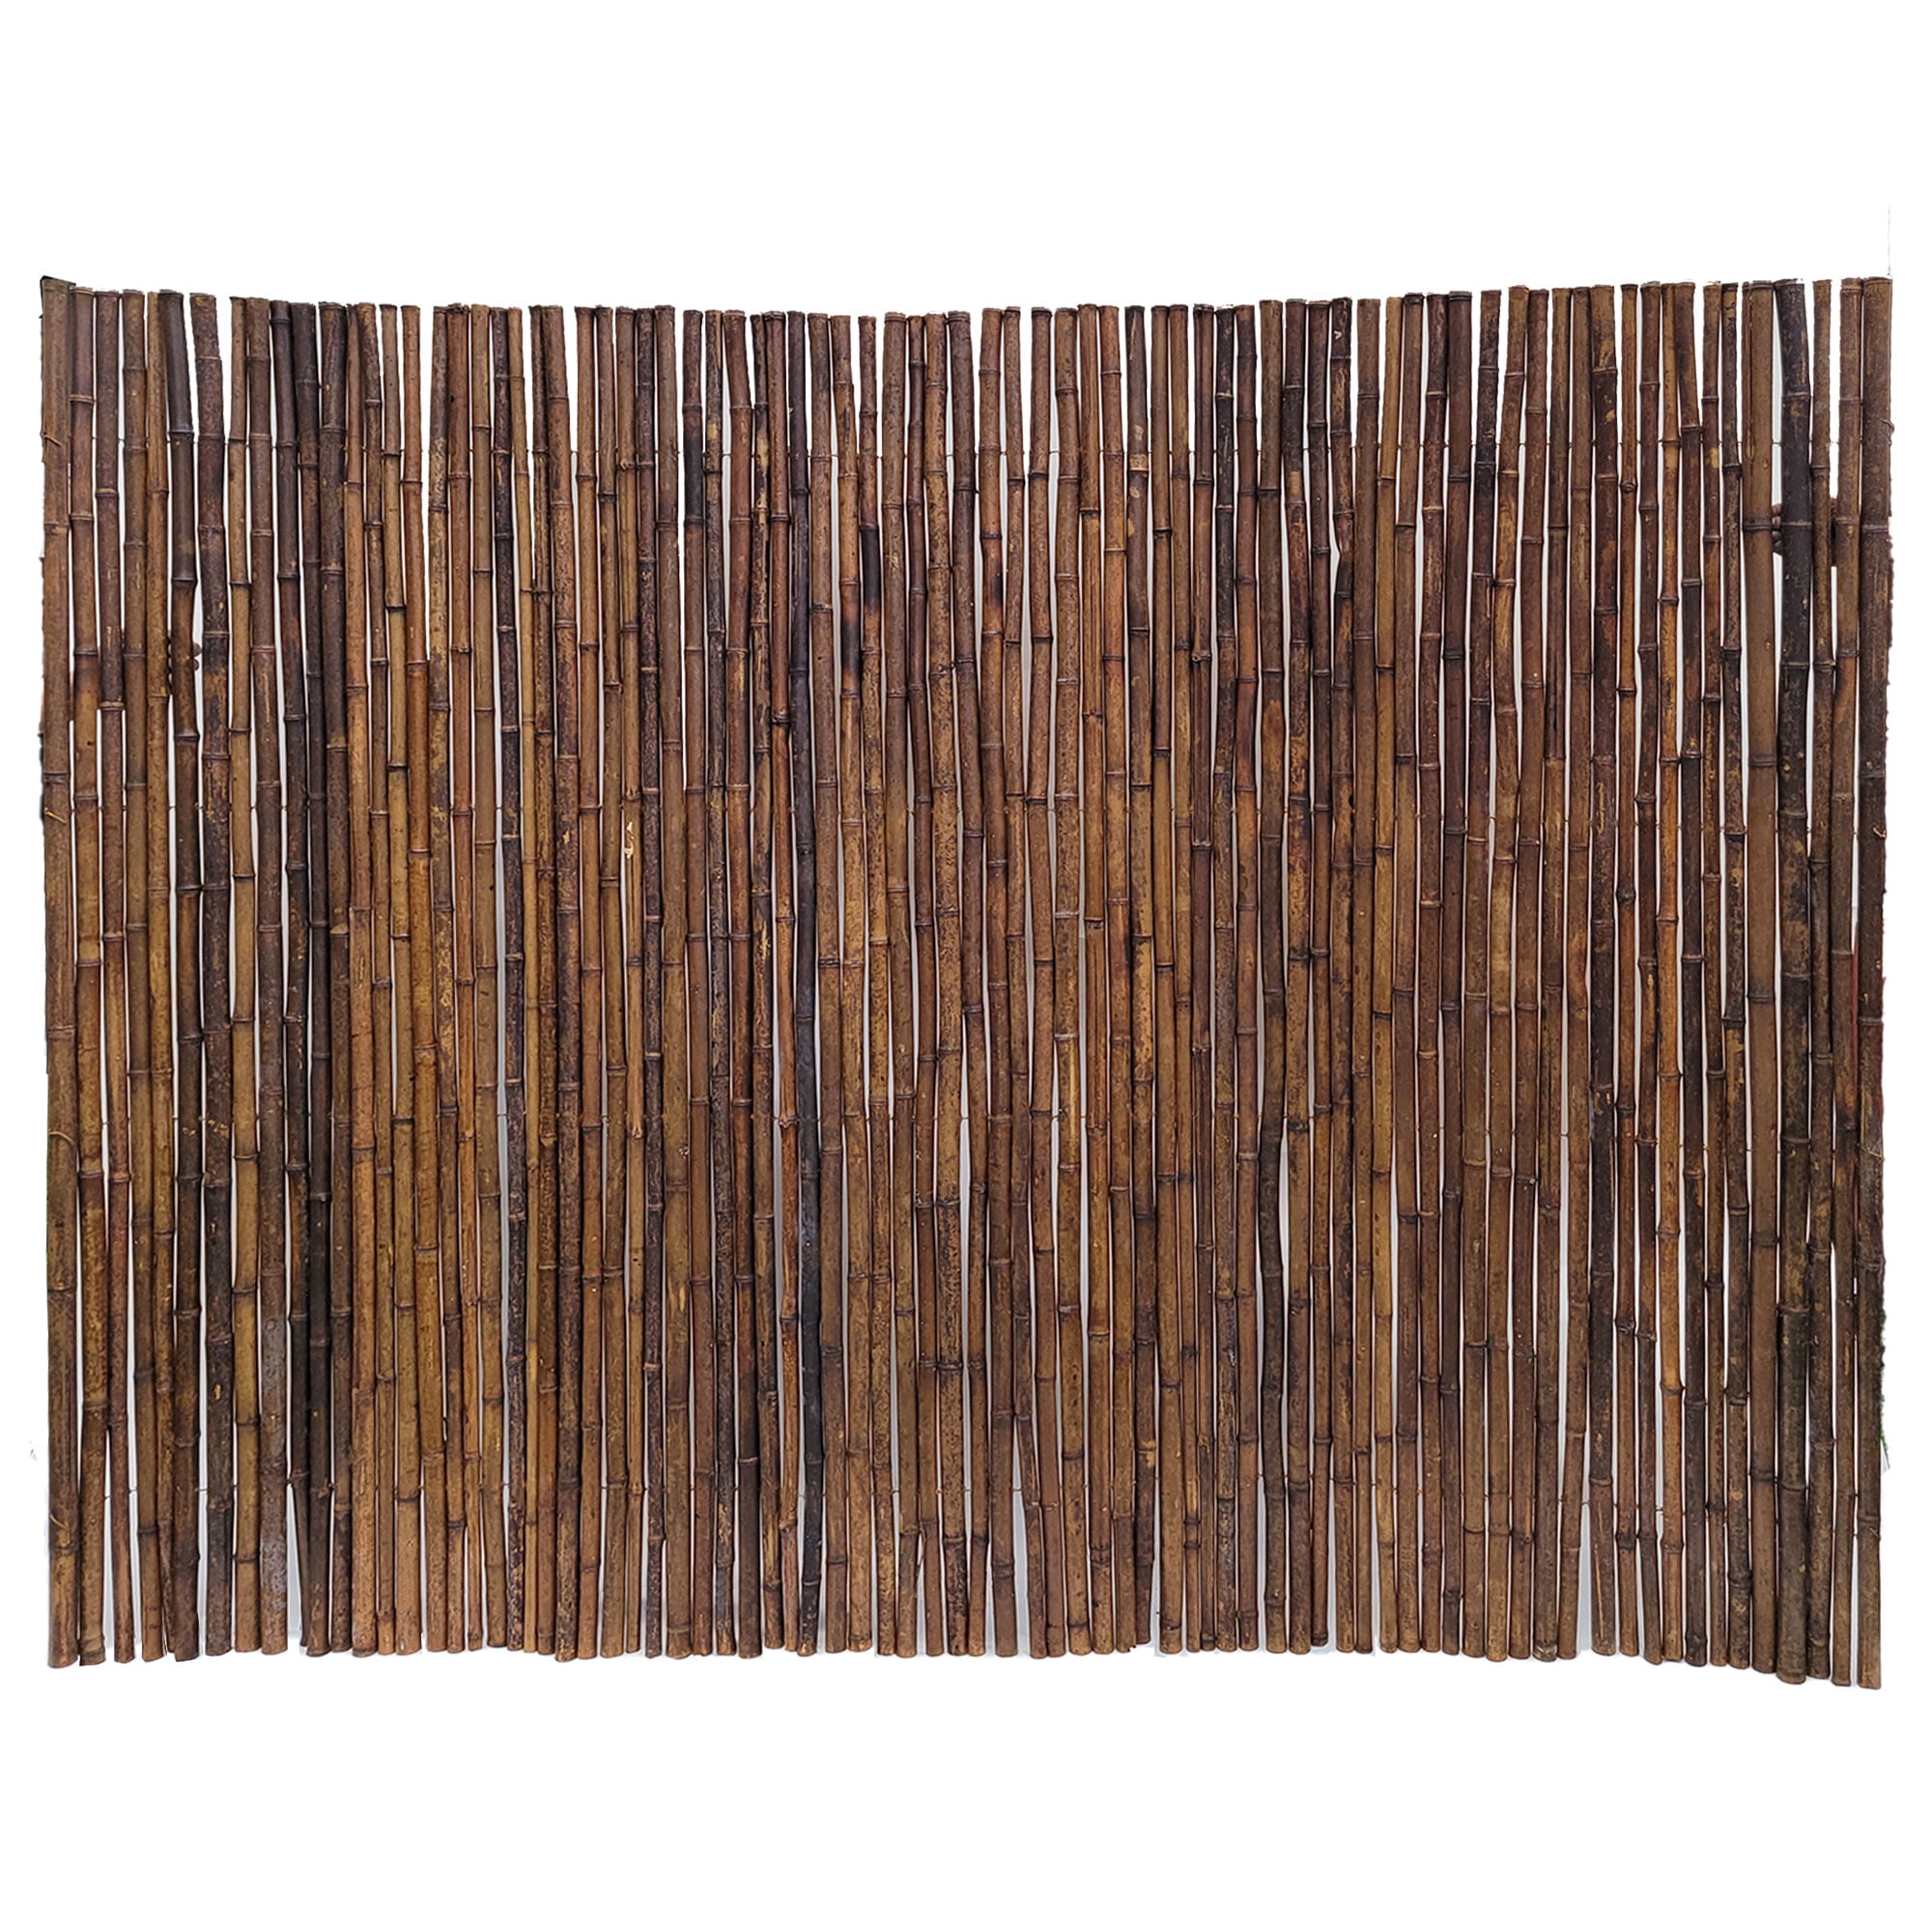 Backyard X-Scapes Bamboo Fence Panel, Caramel Brown, 1/